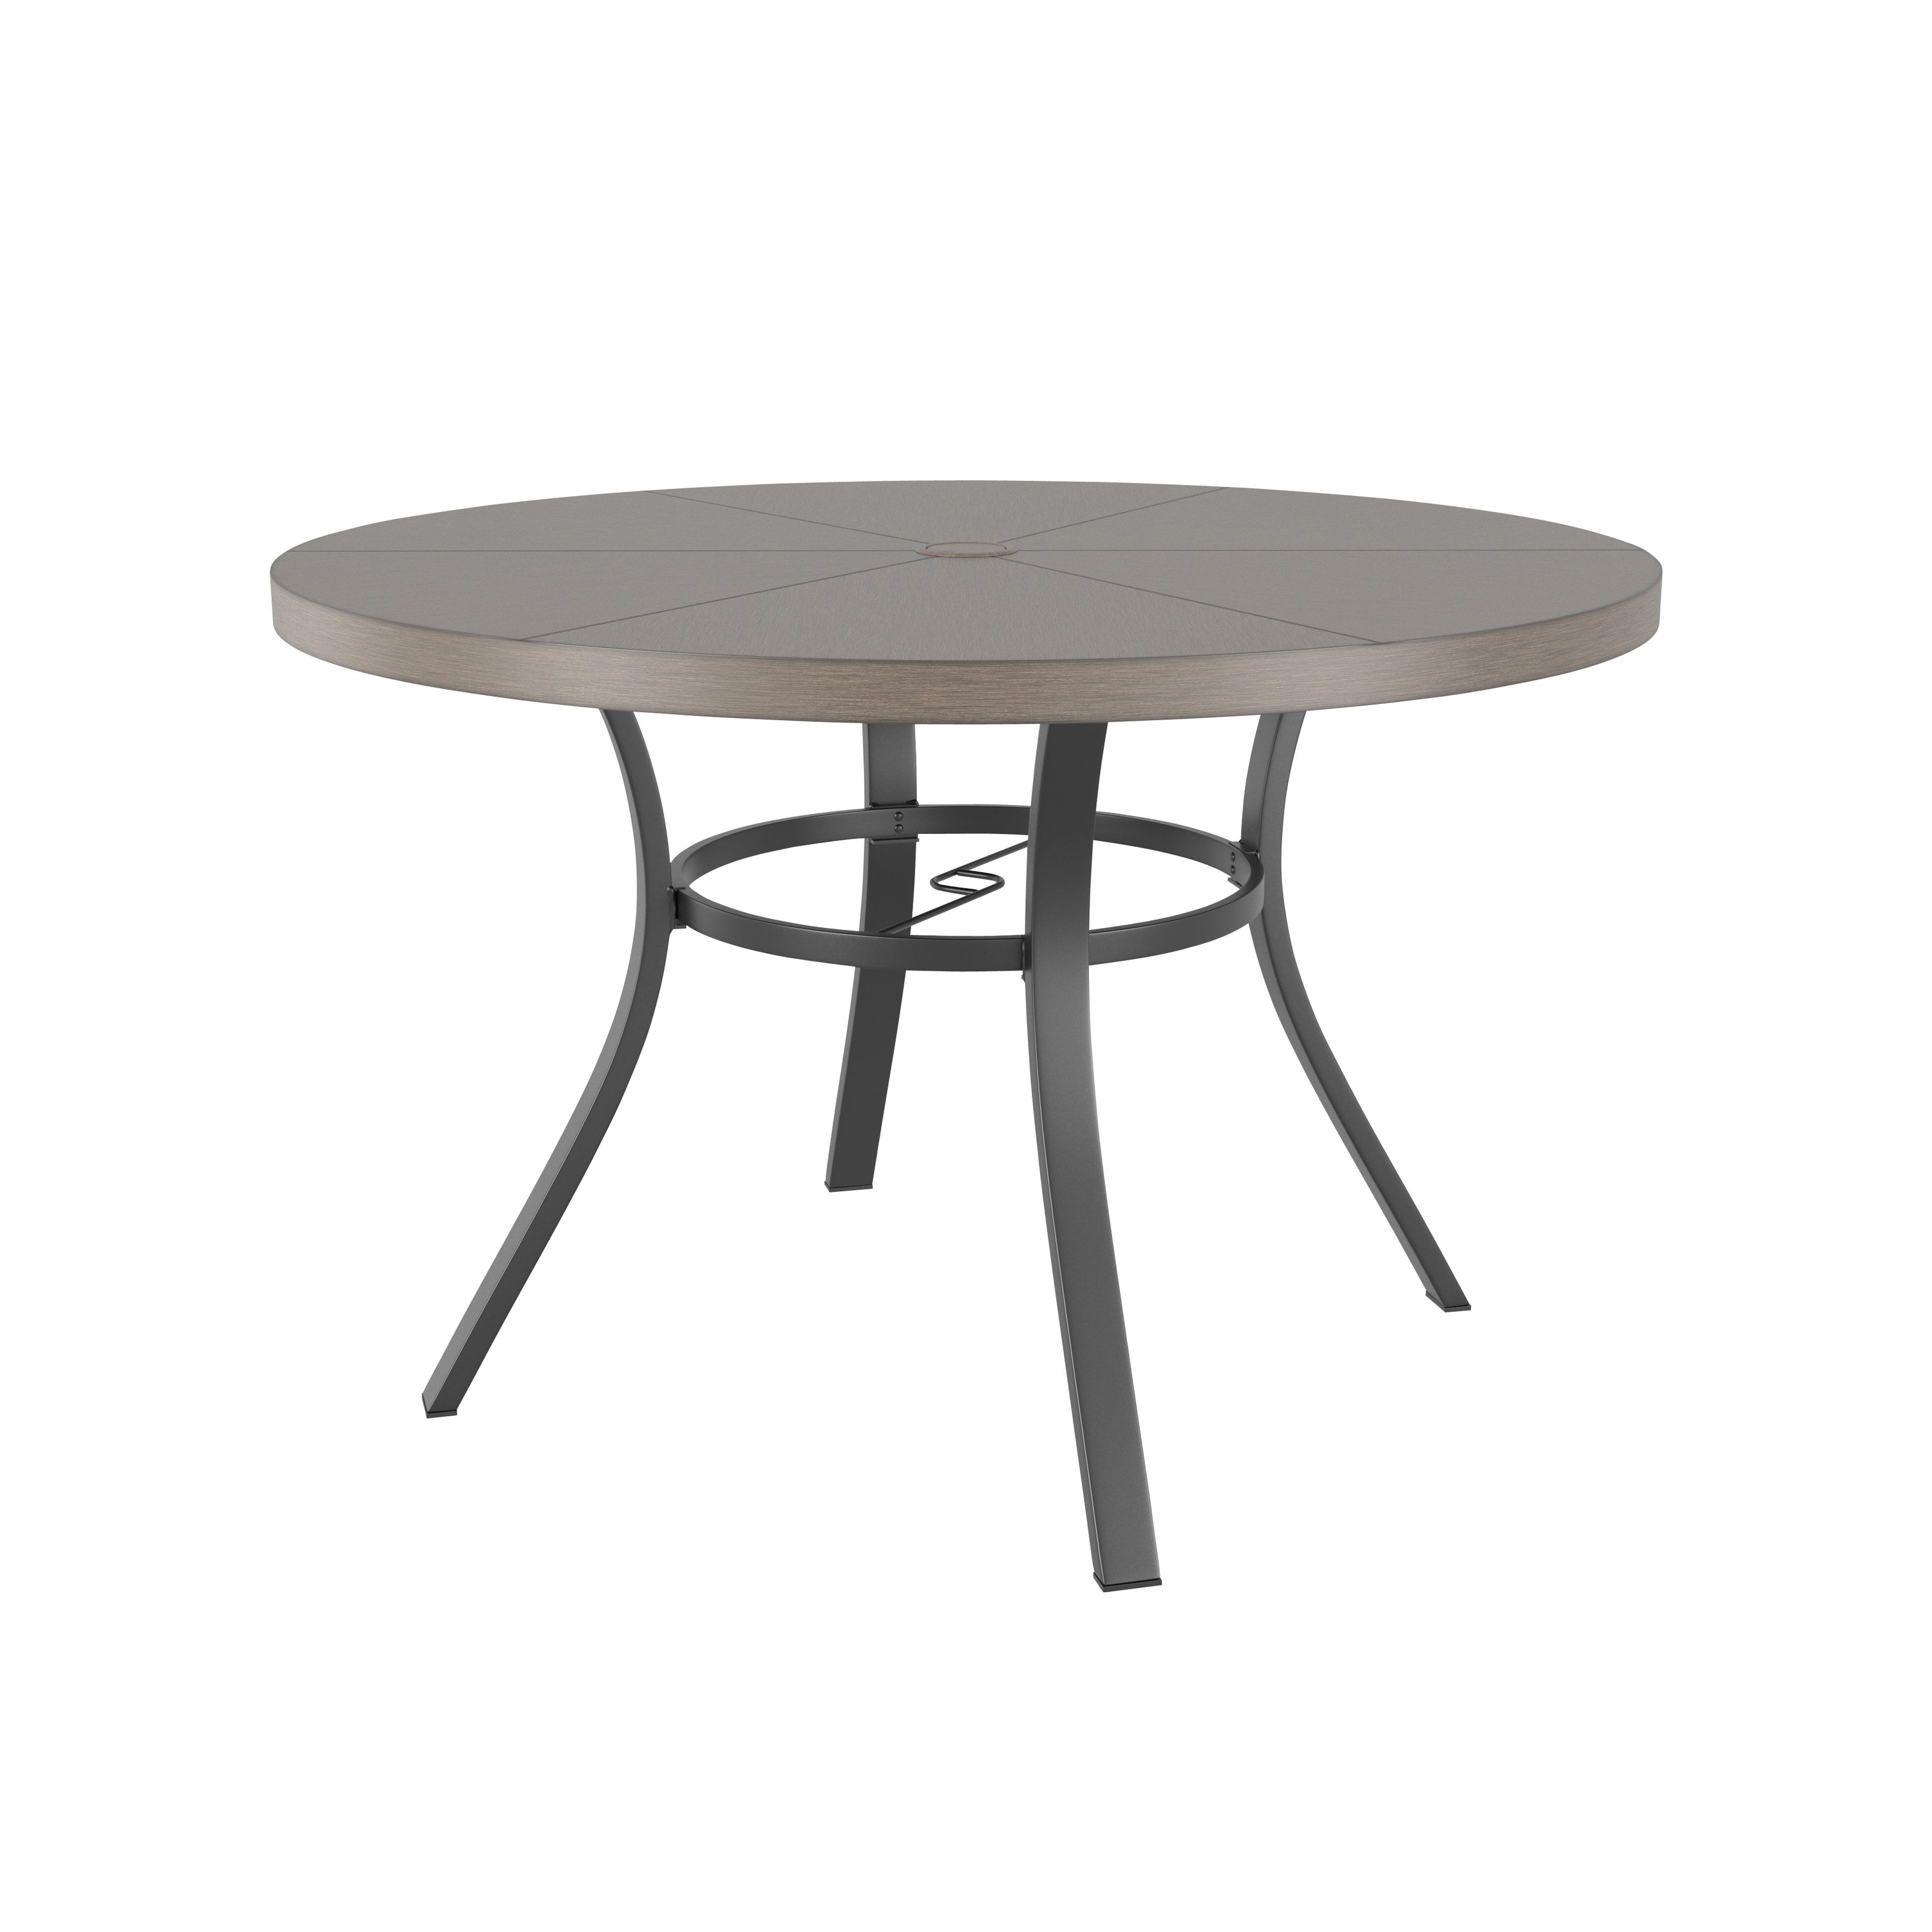 Style Selections Glenwood Round Outdoor, 42 Inch Round Patio Table With Umbrella Hole